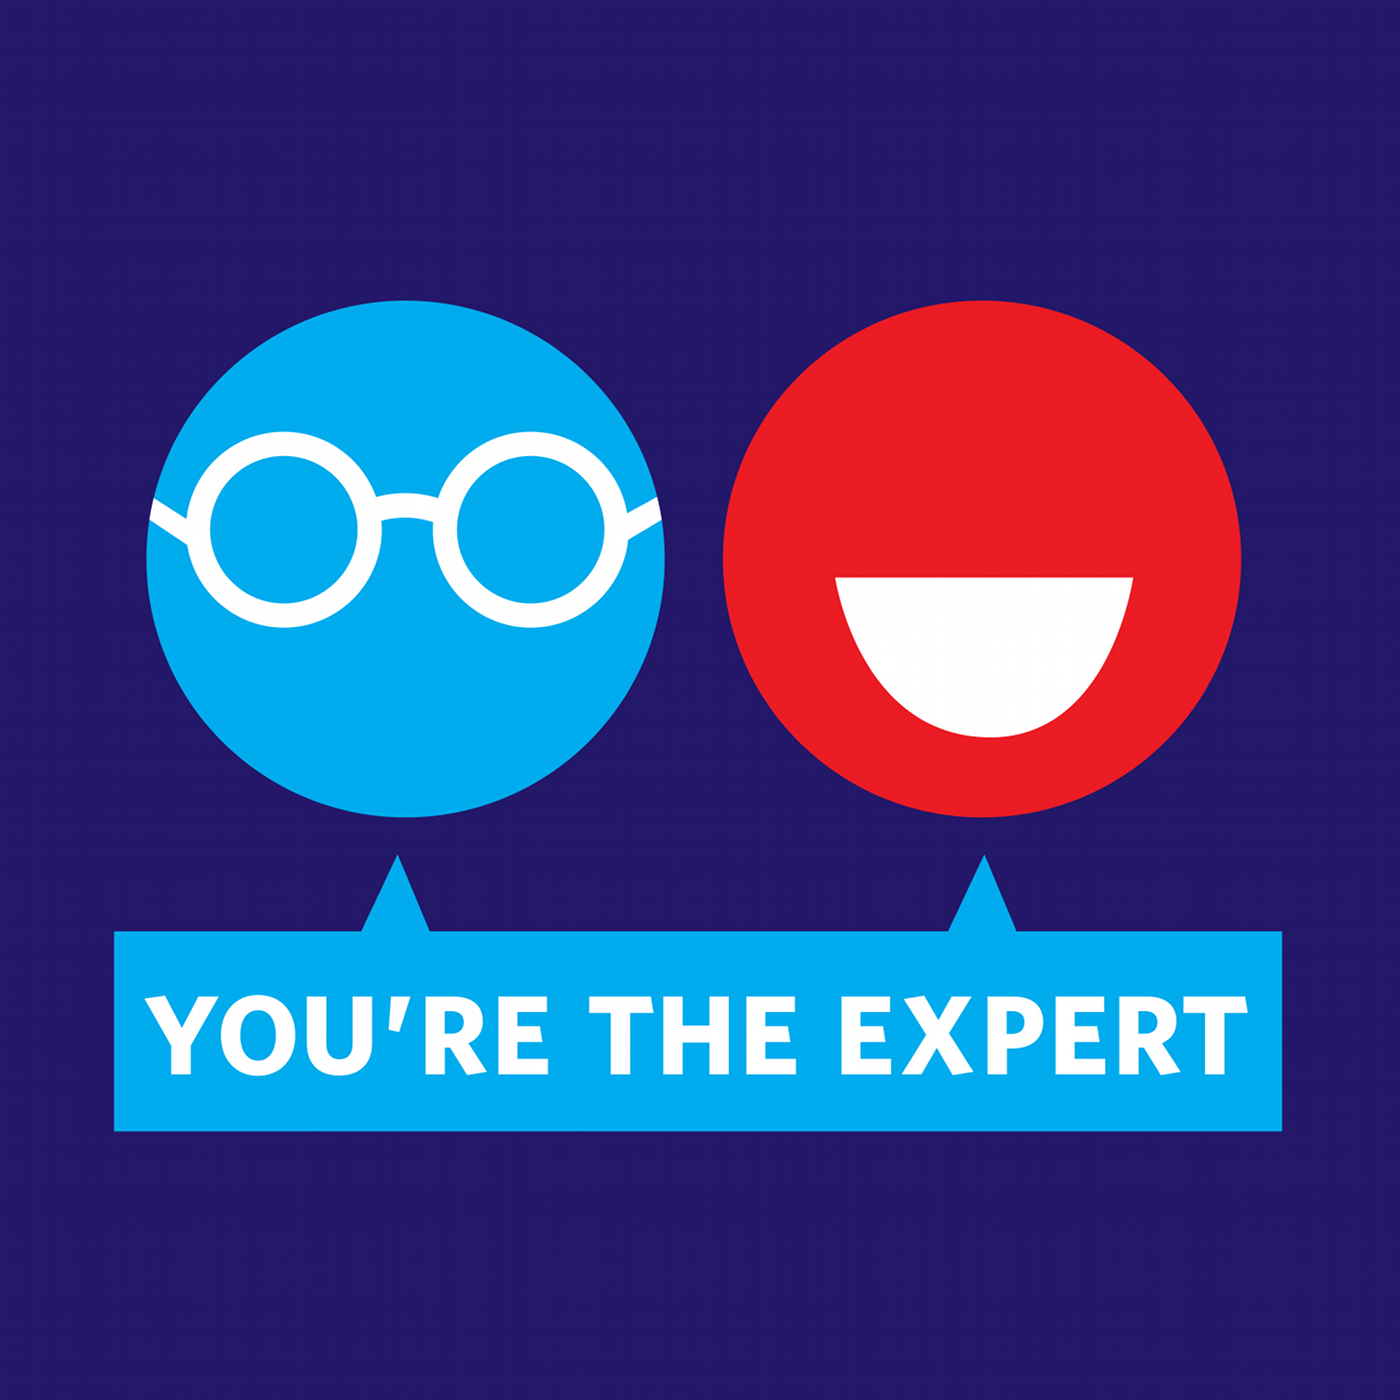 Want to Position Yourself as an Expert? Let’s Go!